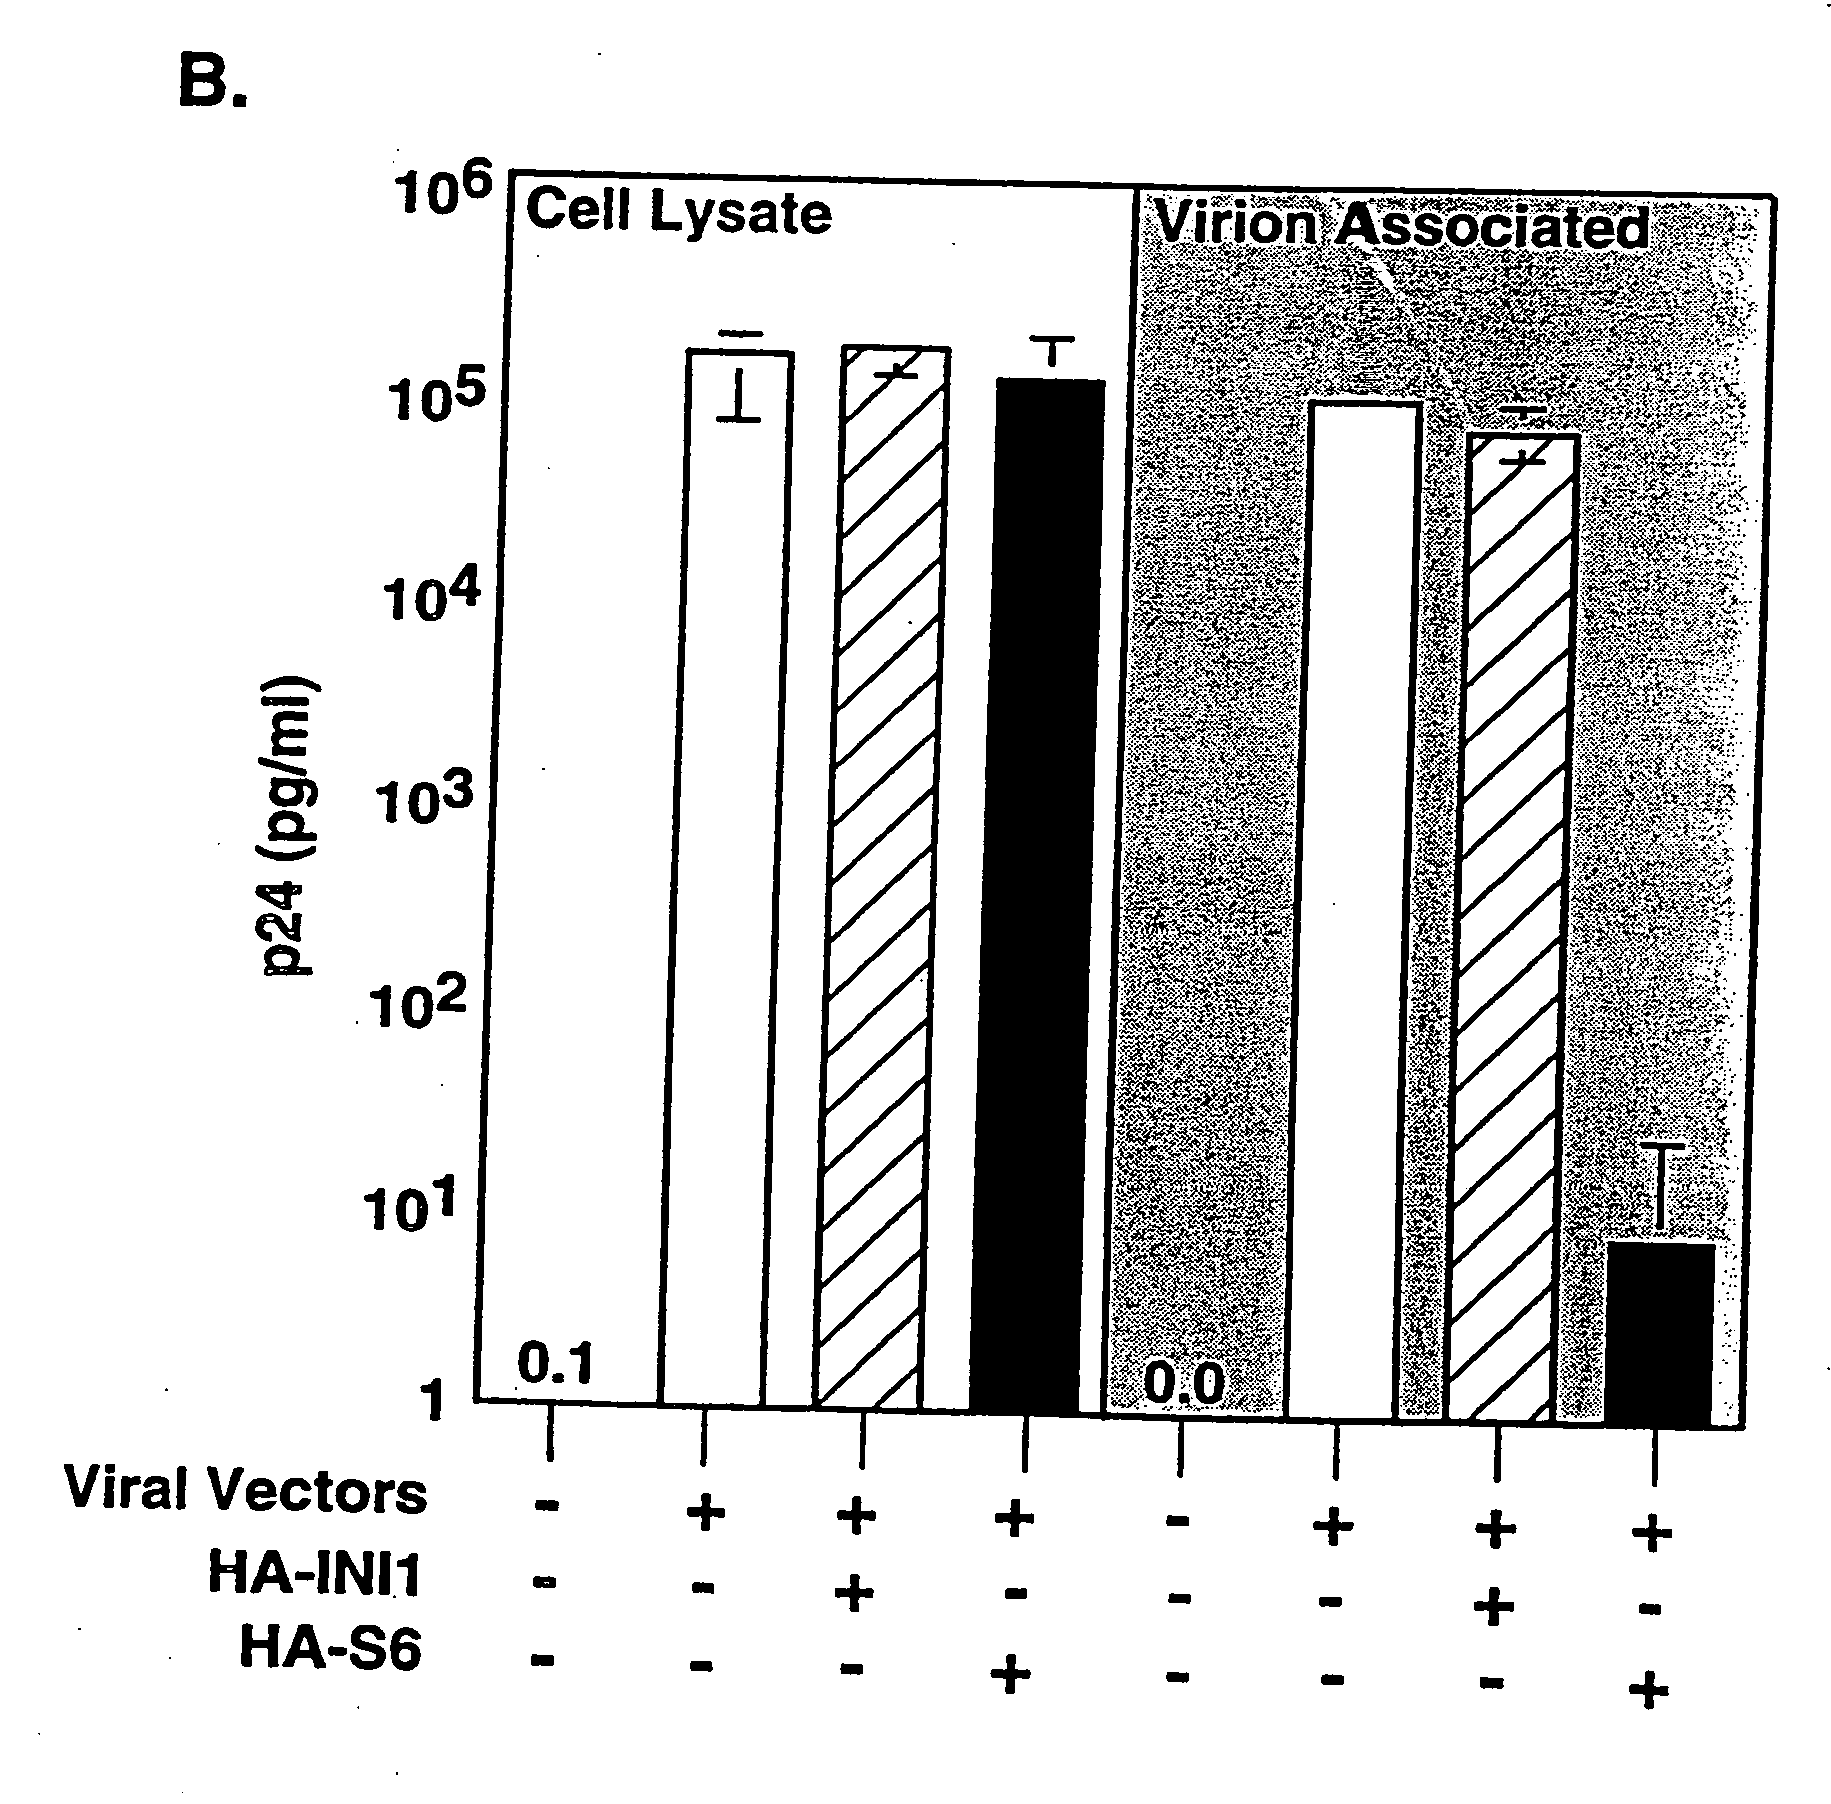 Inhibition of HIV-1 virion production by a transdominant mutant of integrase interactor 1 (INI1)/hSNF5